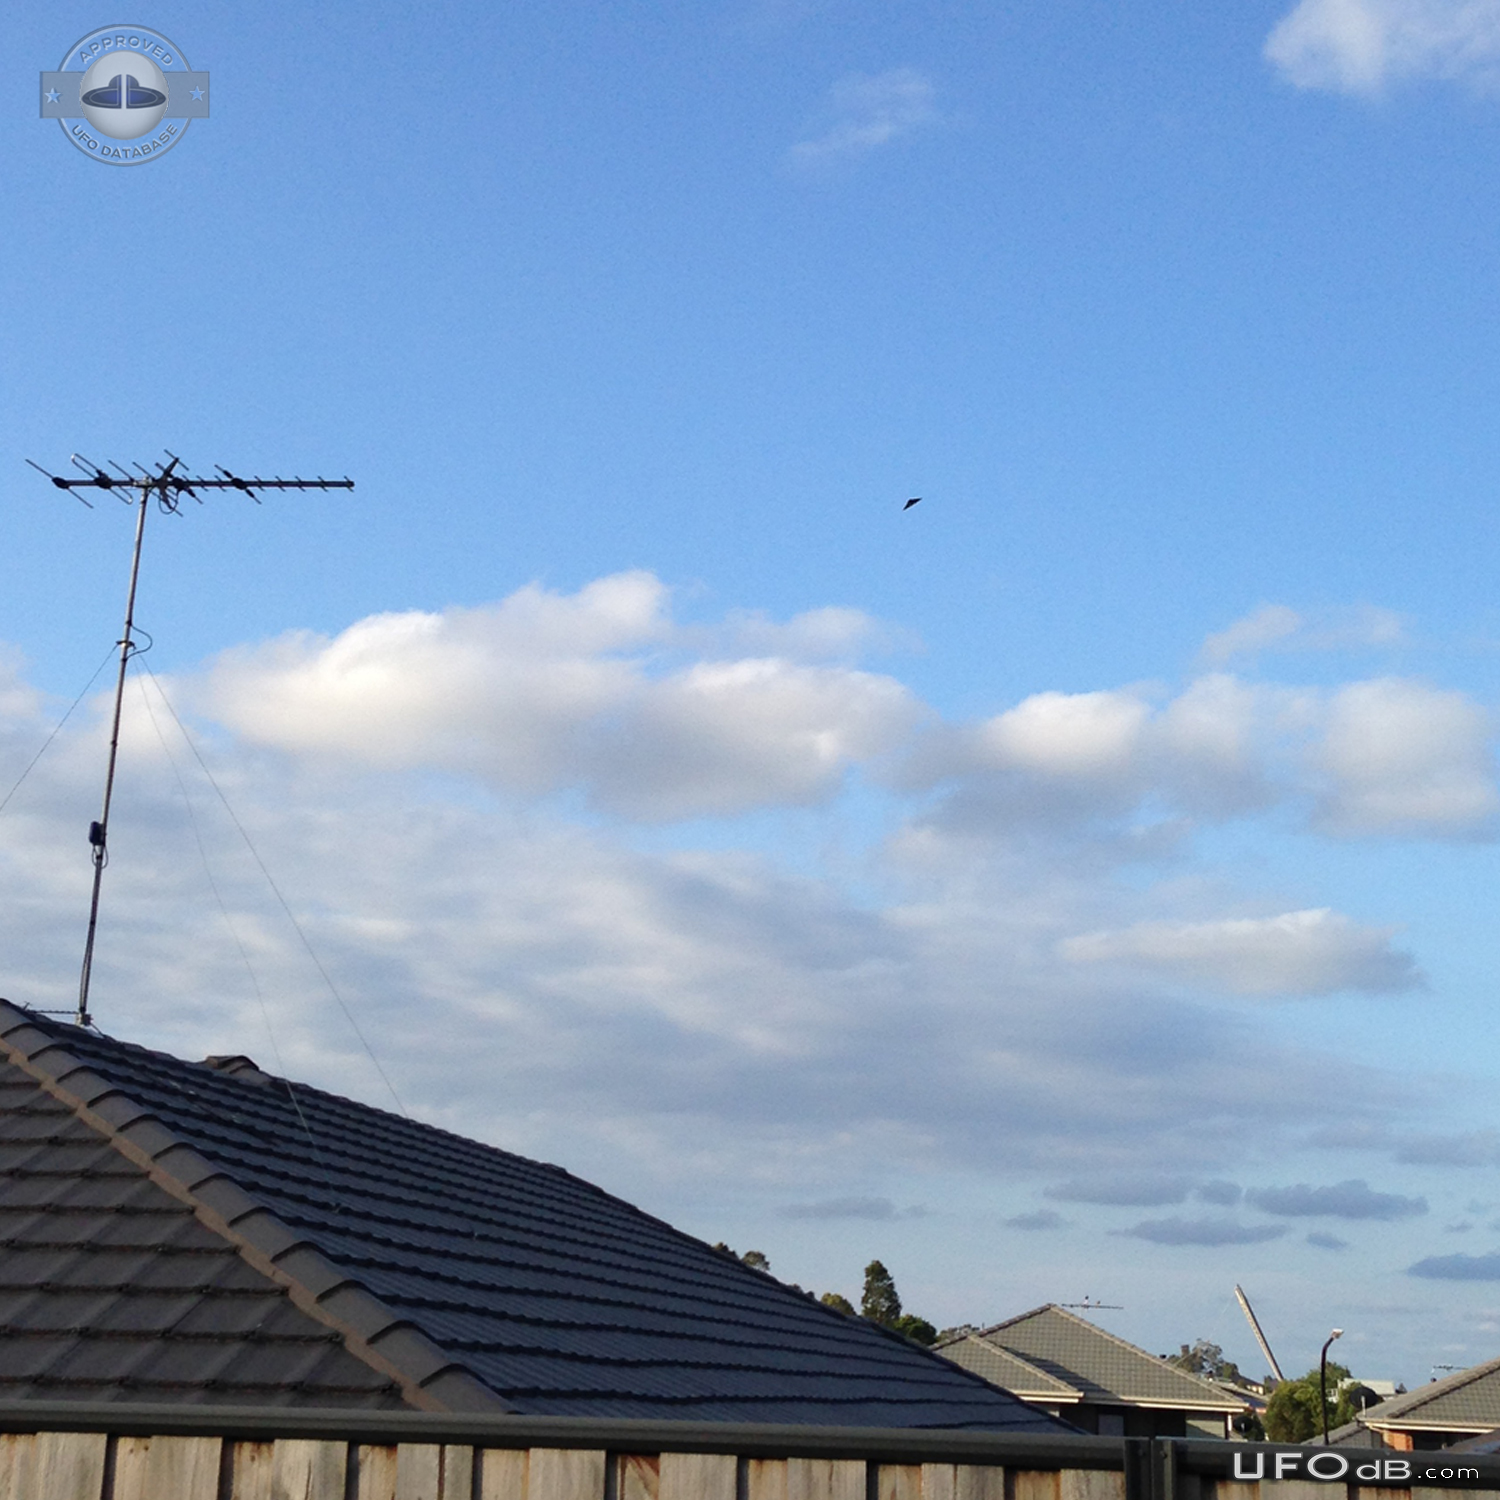 Triangular object hovering in Sky and did not move while observed - Au UFO Picture #736-2